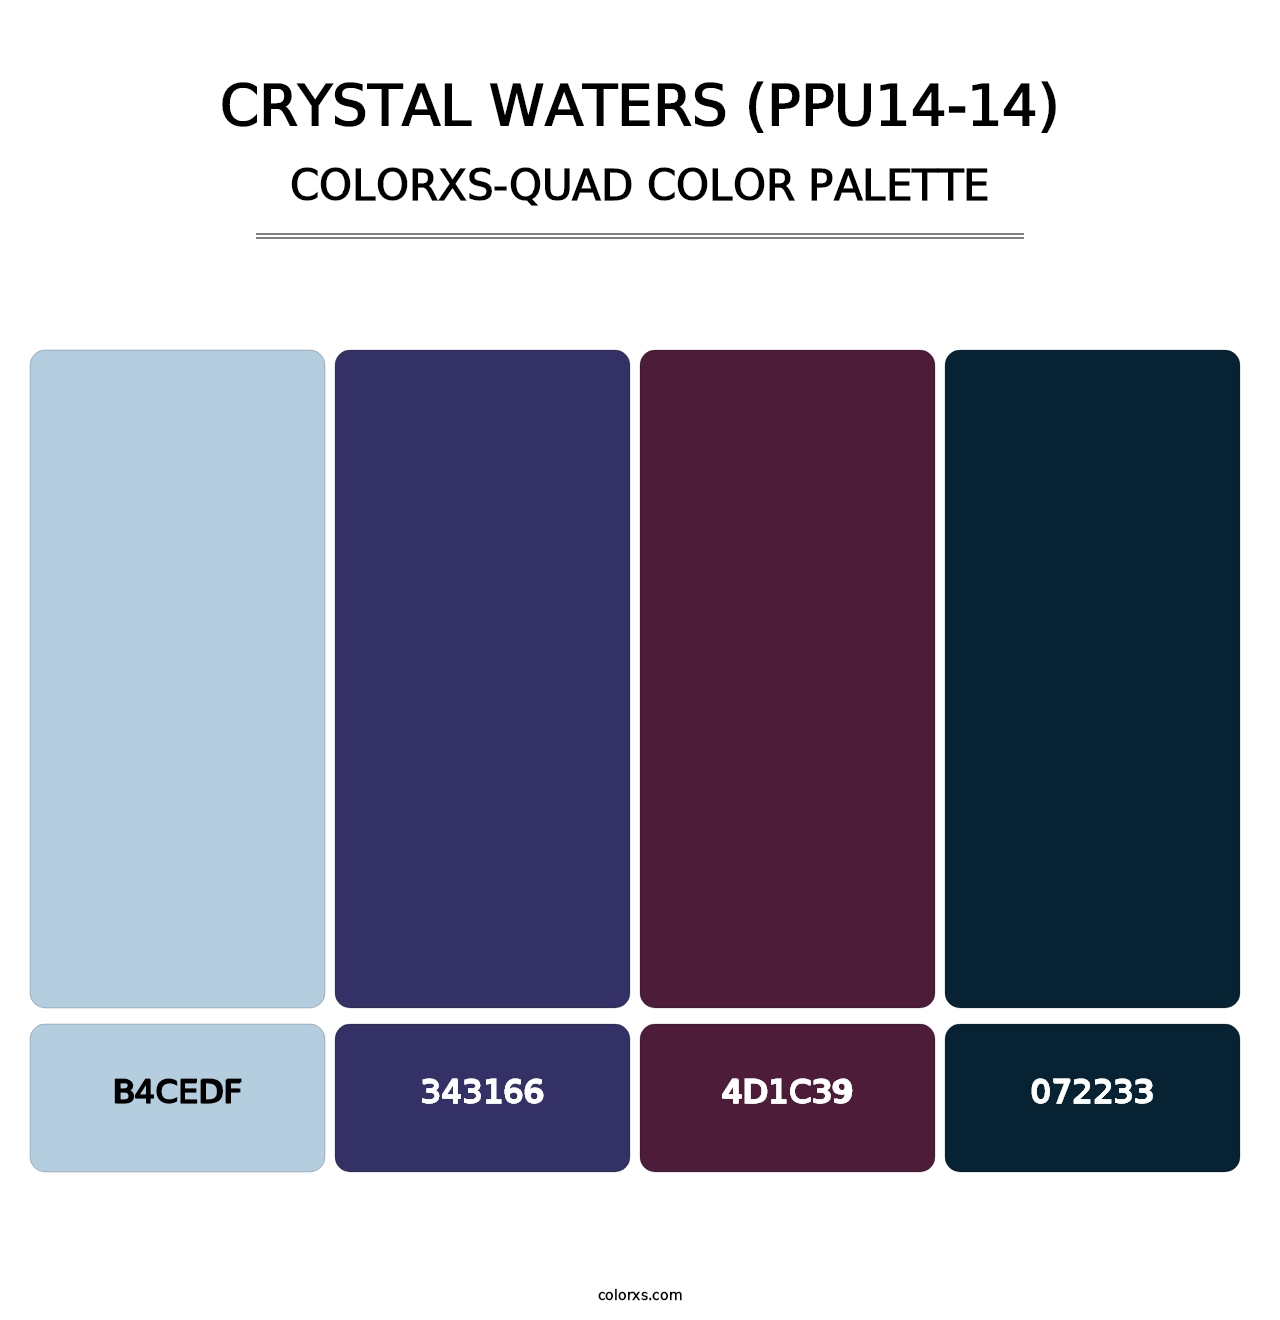 Crystal Waters (PPU14-14) - Colorxs Quad Palette